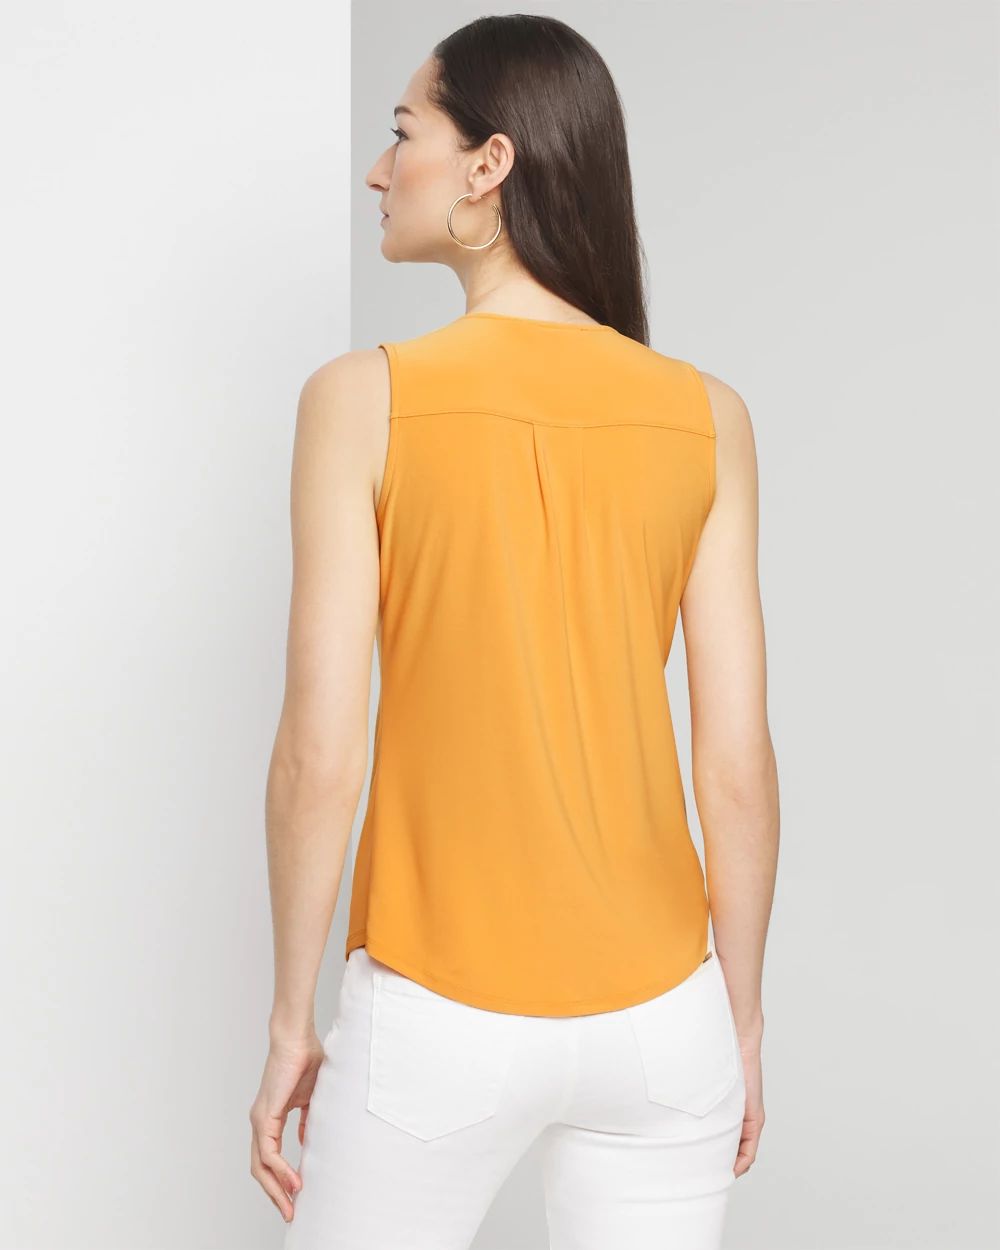 Matte Jersey Lace Notch Neck Tank click to view larger image.